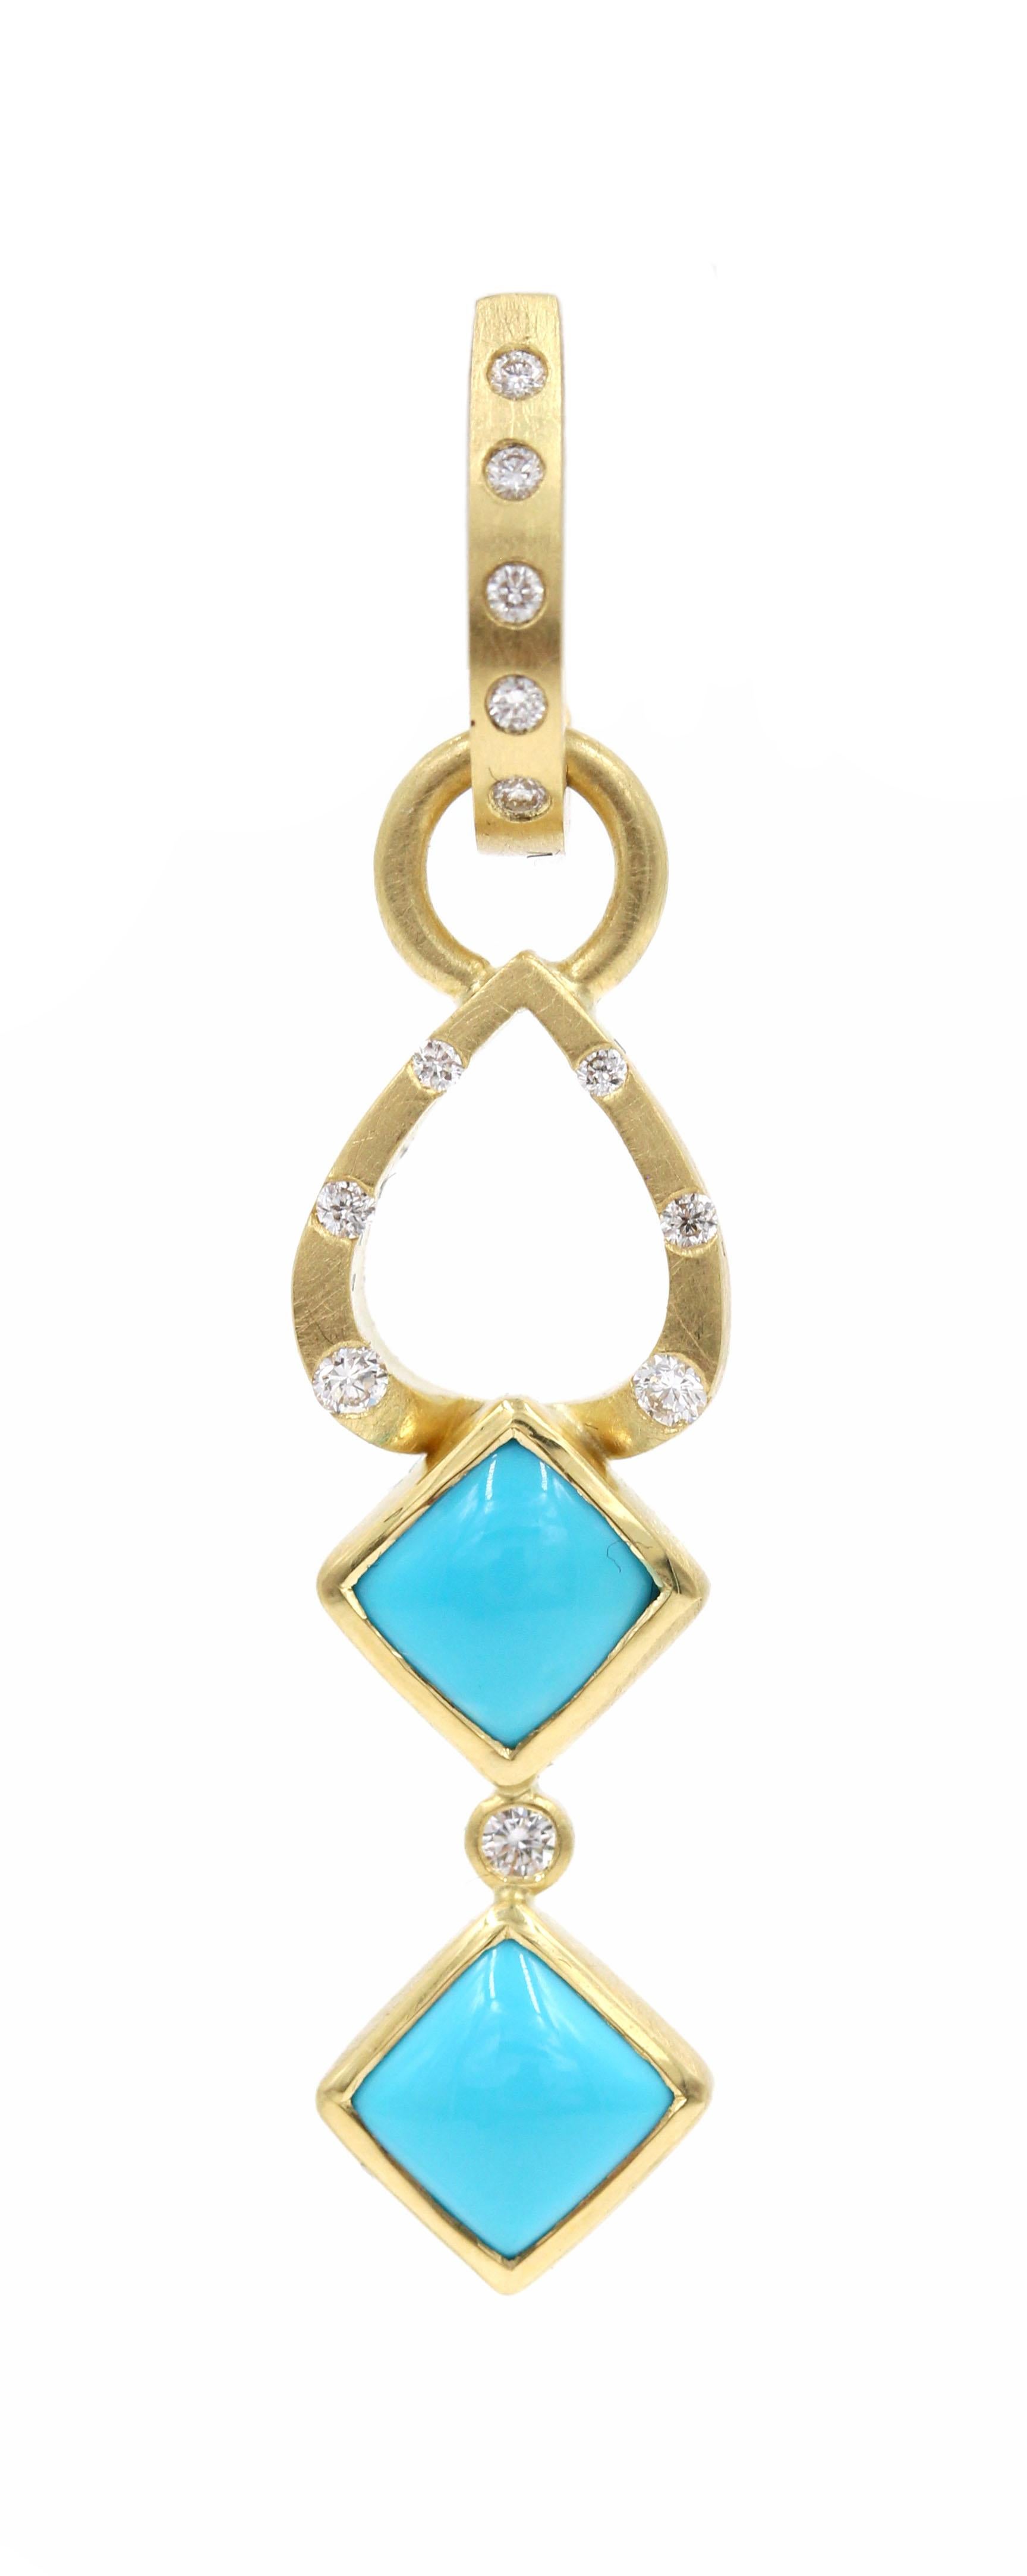 Robin Waynee
Sleeping Beauty Earrings, 2019
VS1 Diamonds, Sleeping Beauty Turquoise, 18K Gold.

Robin has an unprecedented record at the Saul Bell Design Awards, one of the most prestigious international jewelry competitions. She earned First Place